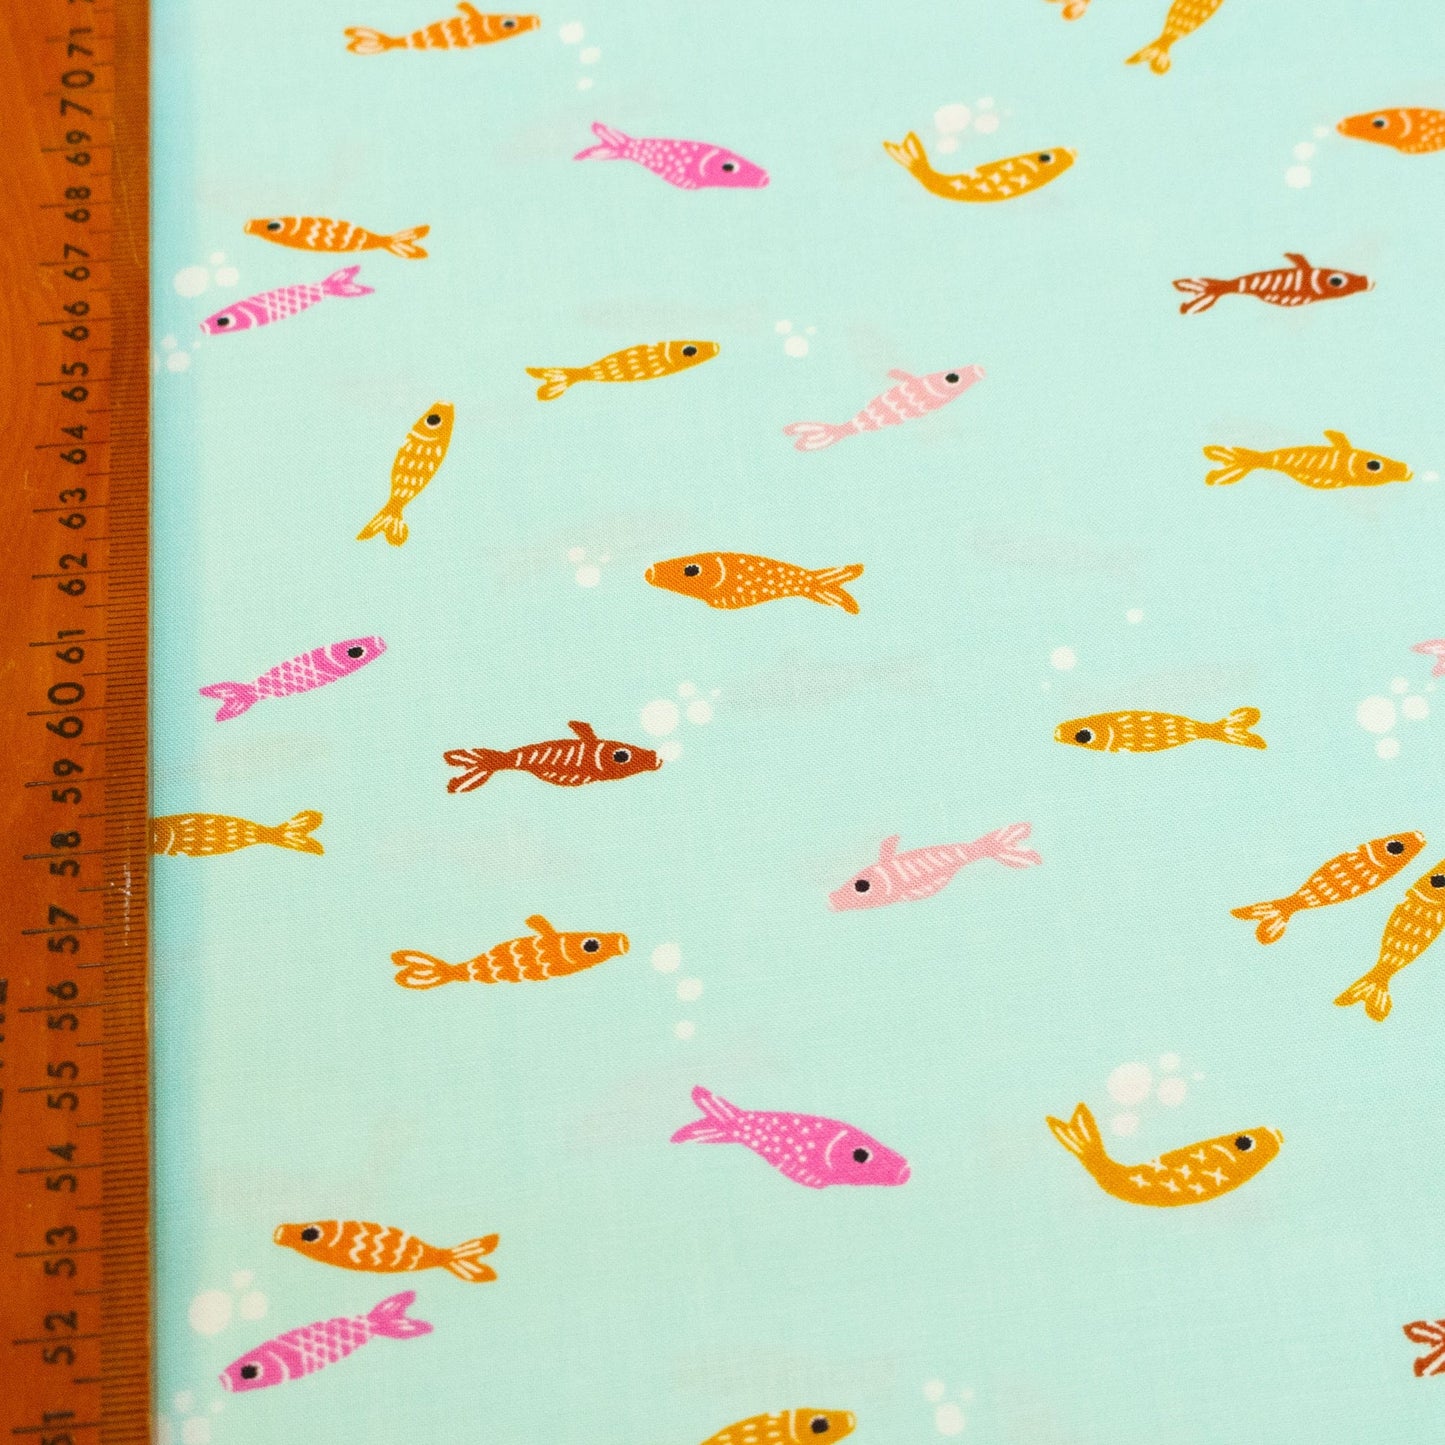 Ruby Star Society 'Koi Pond' Quilting Cotton 'Fishes' in Mint